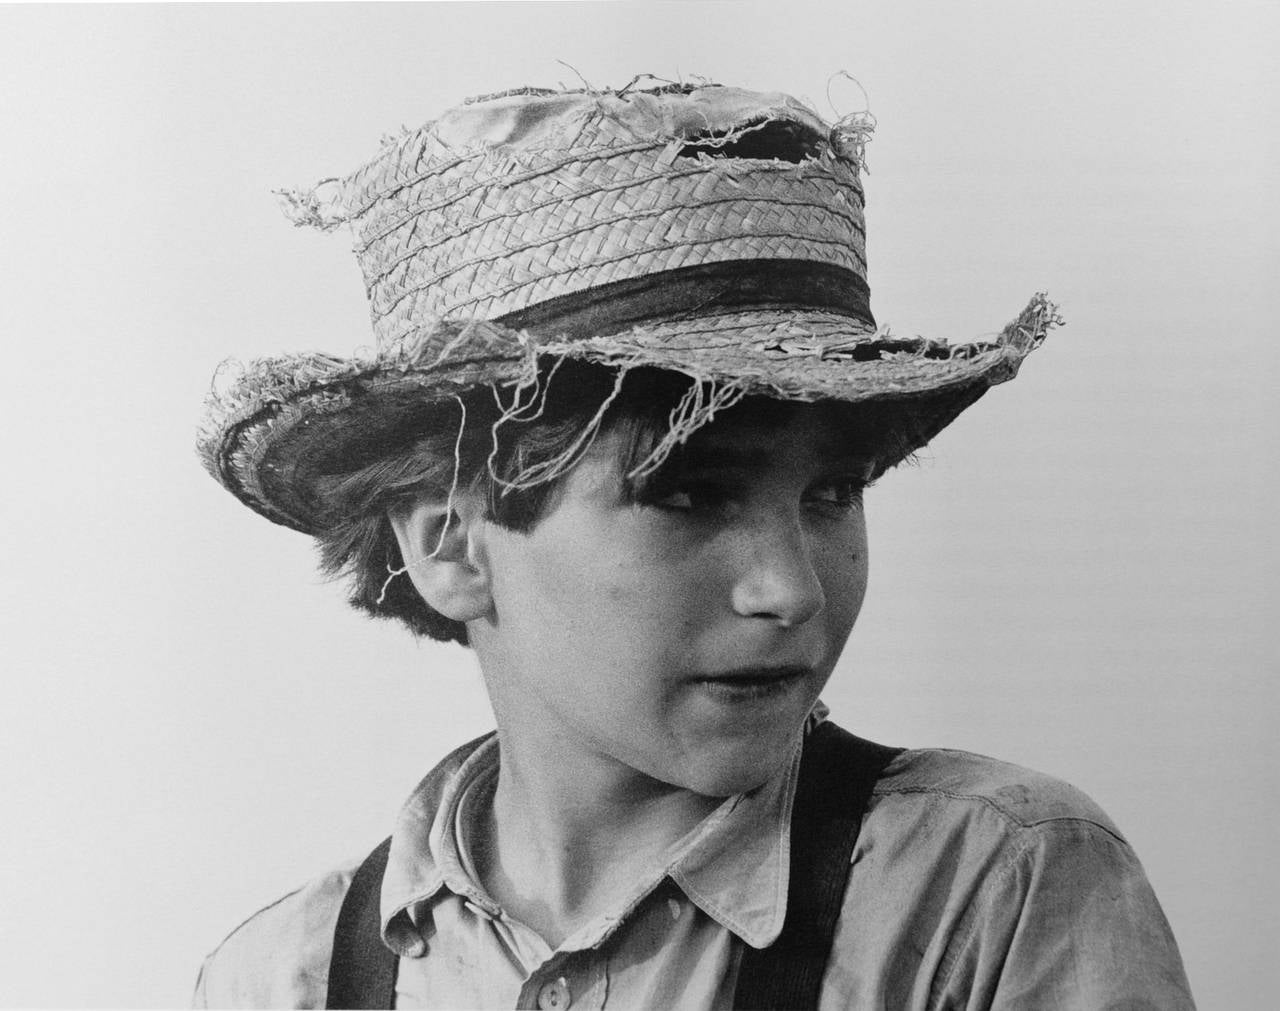 George Tice Black and White Photograph - Amish Boy with Straw Hat, Lancaster, PA